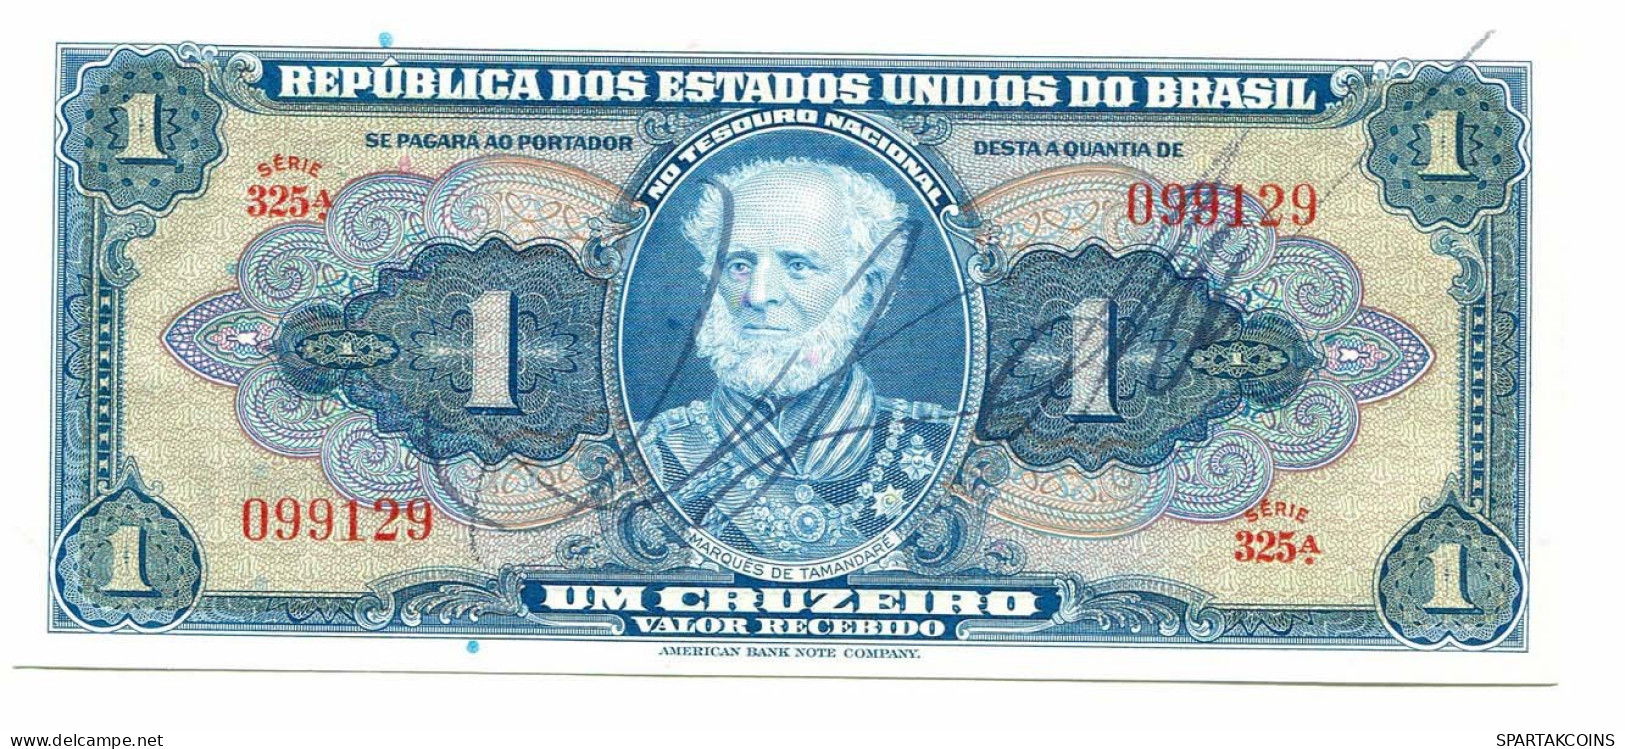 BRASIL 1 CRUZEIRO 1954 SERIE 325A Hand Signed P 132 UNC Paper Money #P10822.4 - [11] Local Banknote Issues